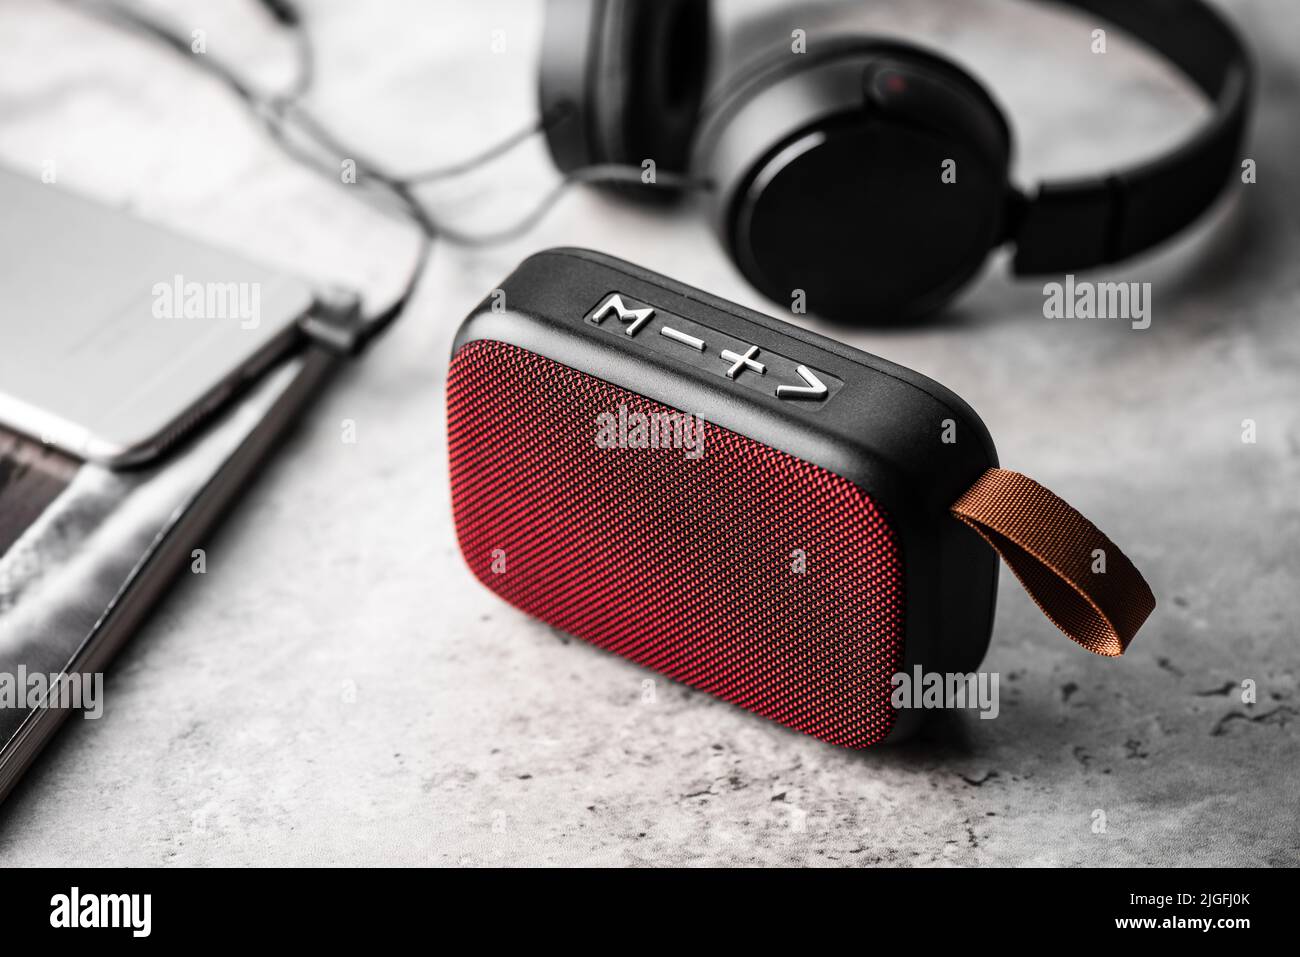 relaxing concept, close up red wireless portable speaker for music listening. Stock Photo